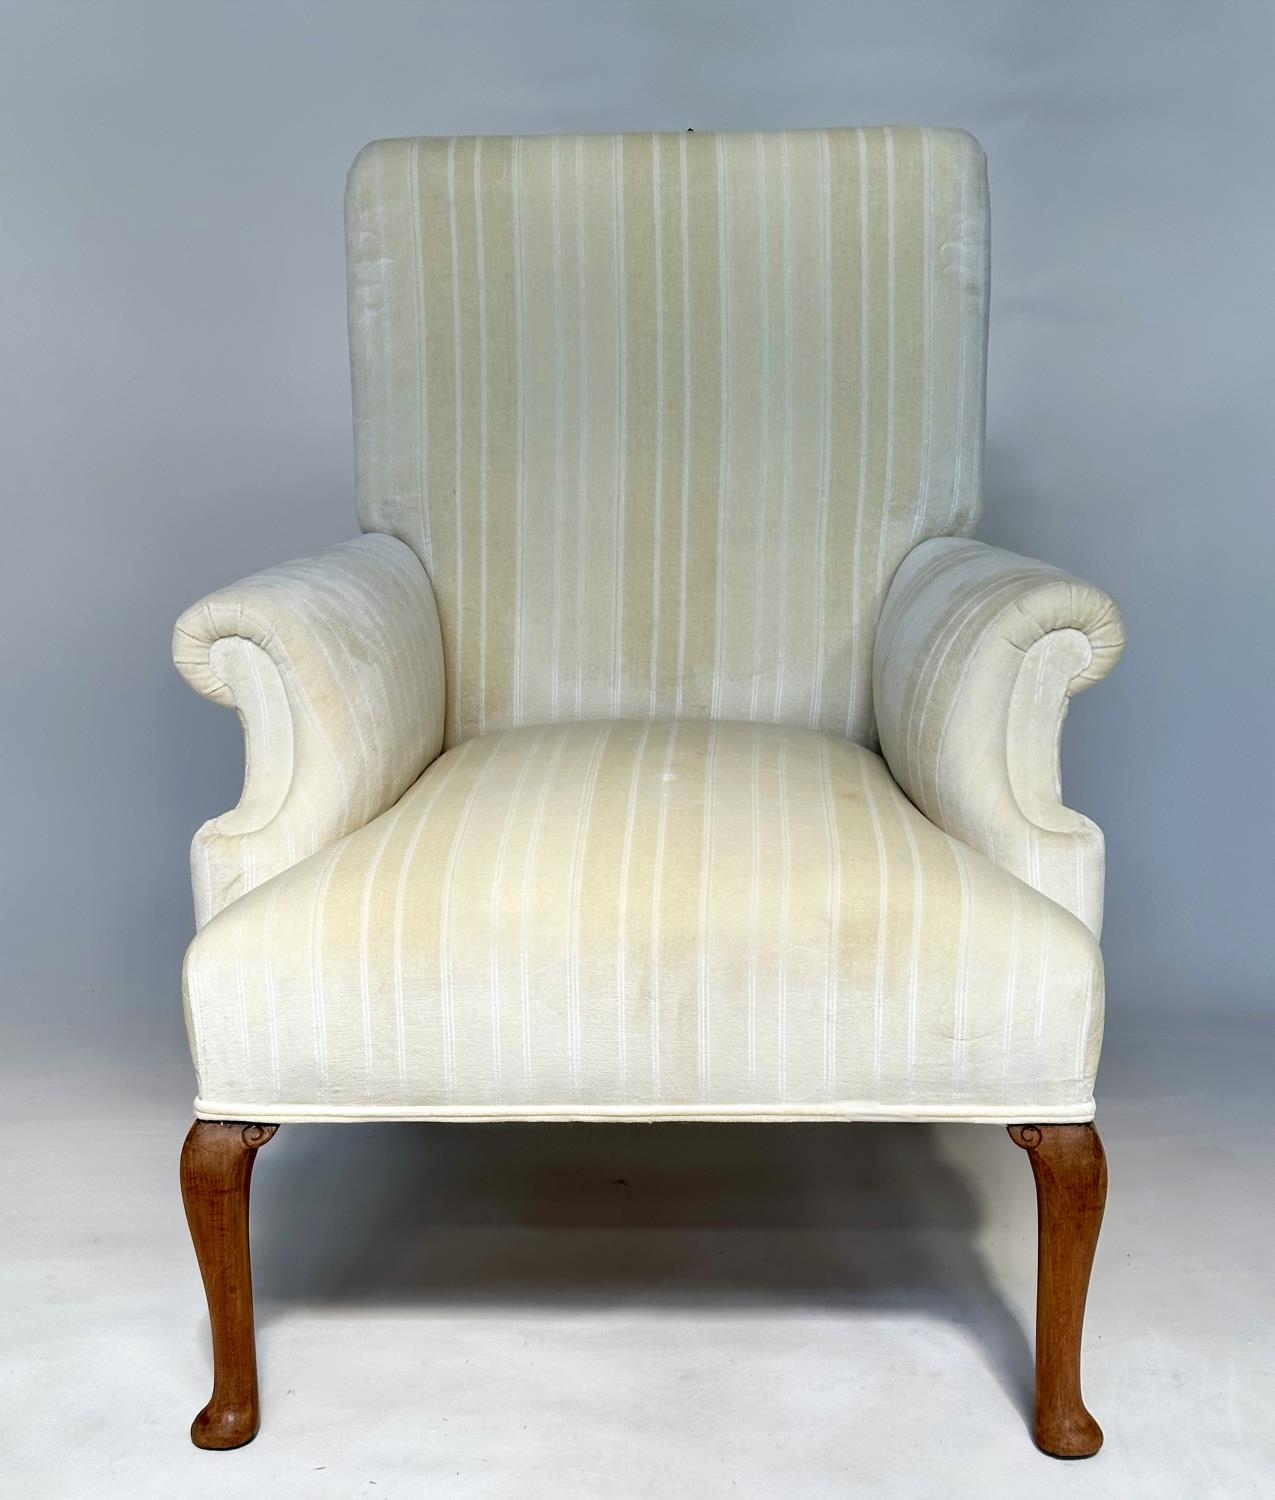 SCROLL ARMCHAIR, Edwardian style recently reupholstered, in neutral woven strip cotton with shaped - Image 4 of 5